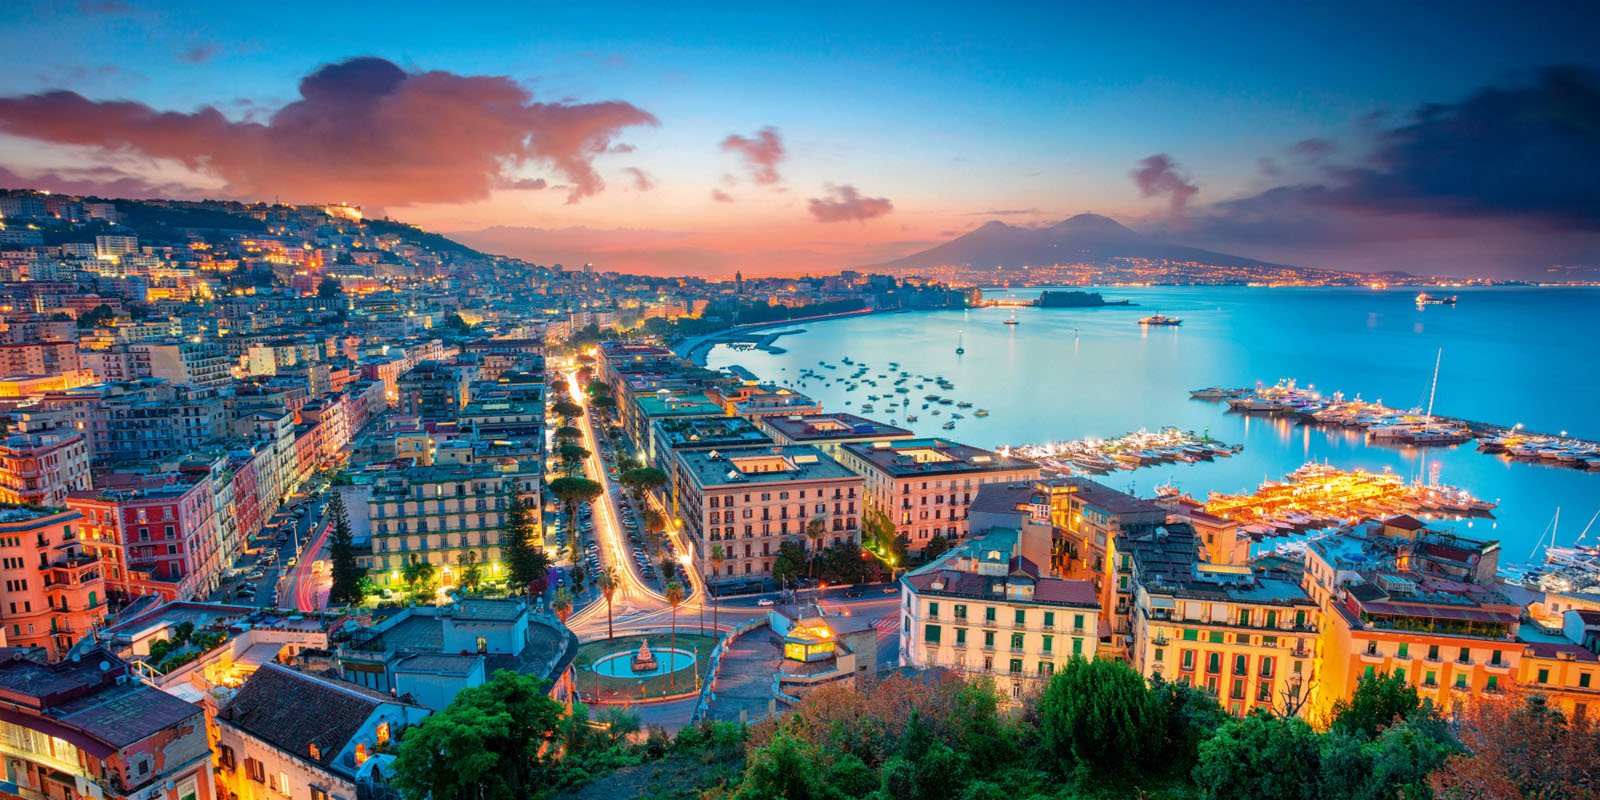 What to do during Naples shore excursions